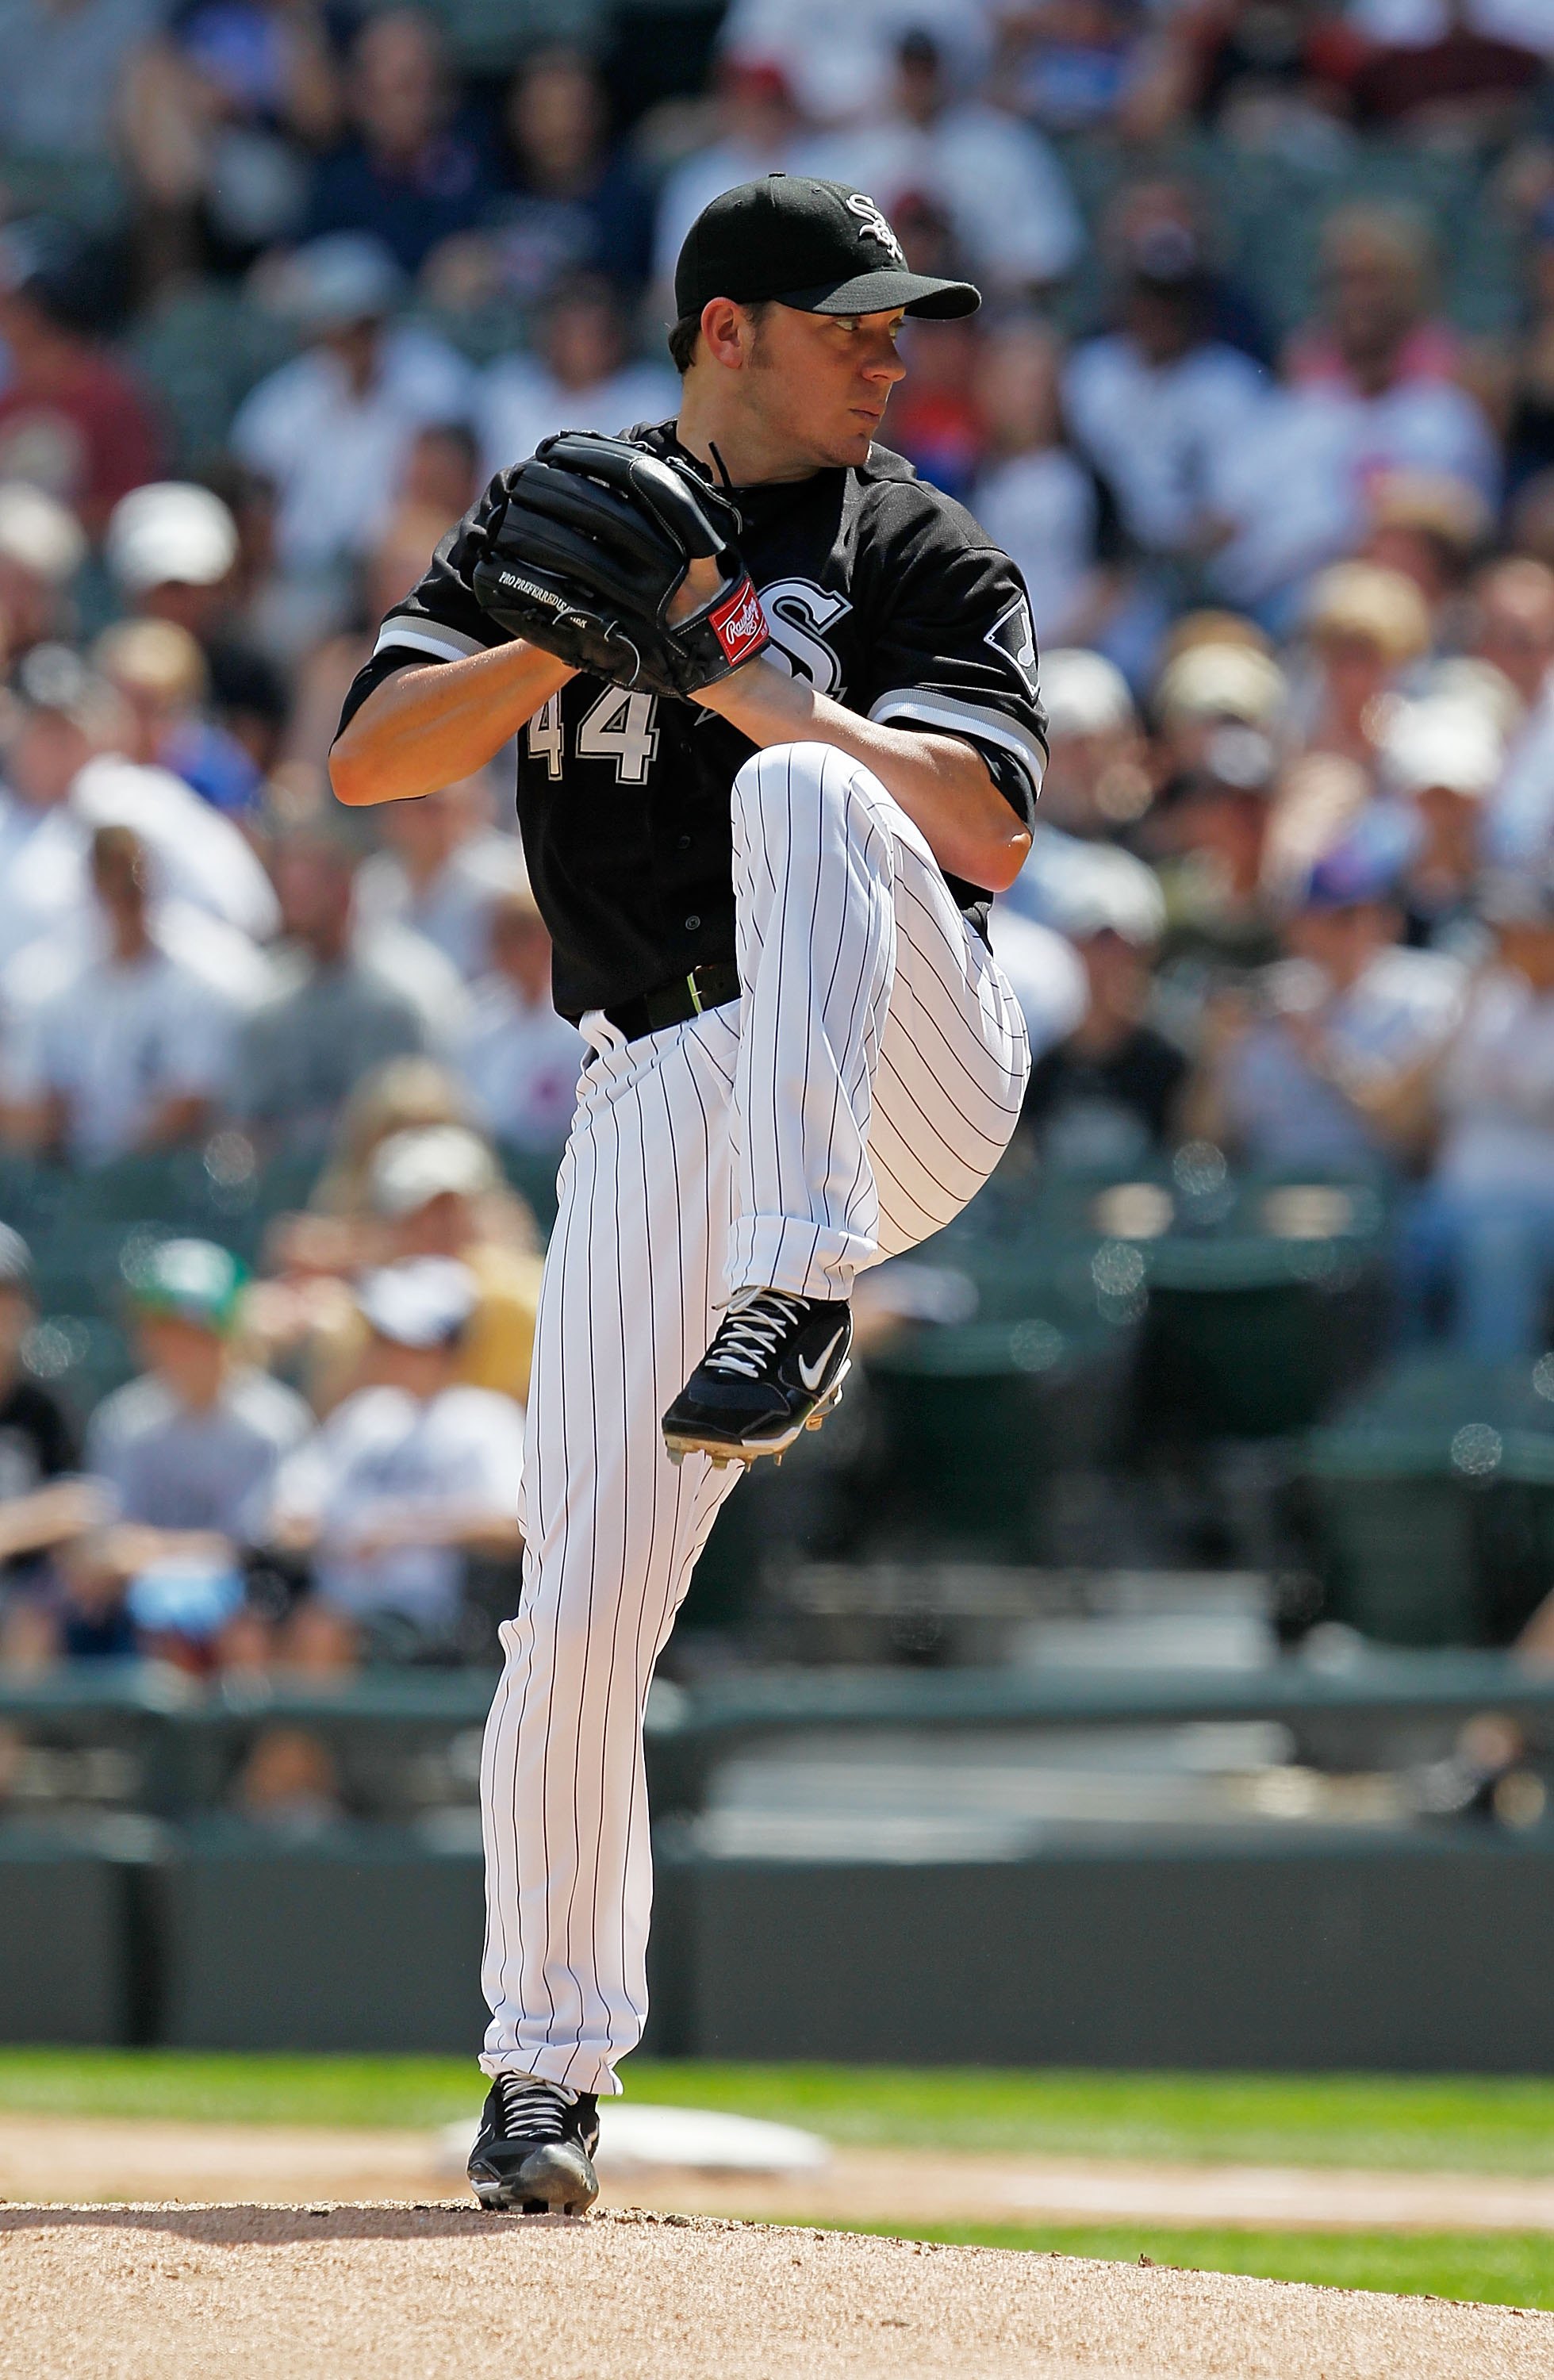 CHICAGO - JUNE 25: Starting pitcher Jake Peavy #44 of the Chicago White Sox delivers the ball against the Chicago Cubs at U.S. Cellular Field on June 25, 2010 in Chicago, Illinois. The White Sox defeated the Cubs 6-0. (Photo by Jonathan Daniel/Getty Image